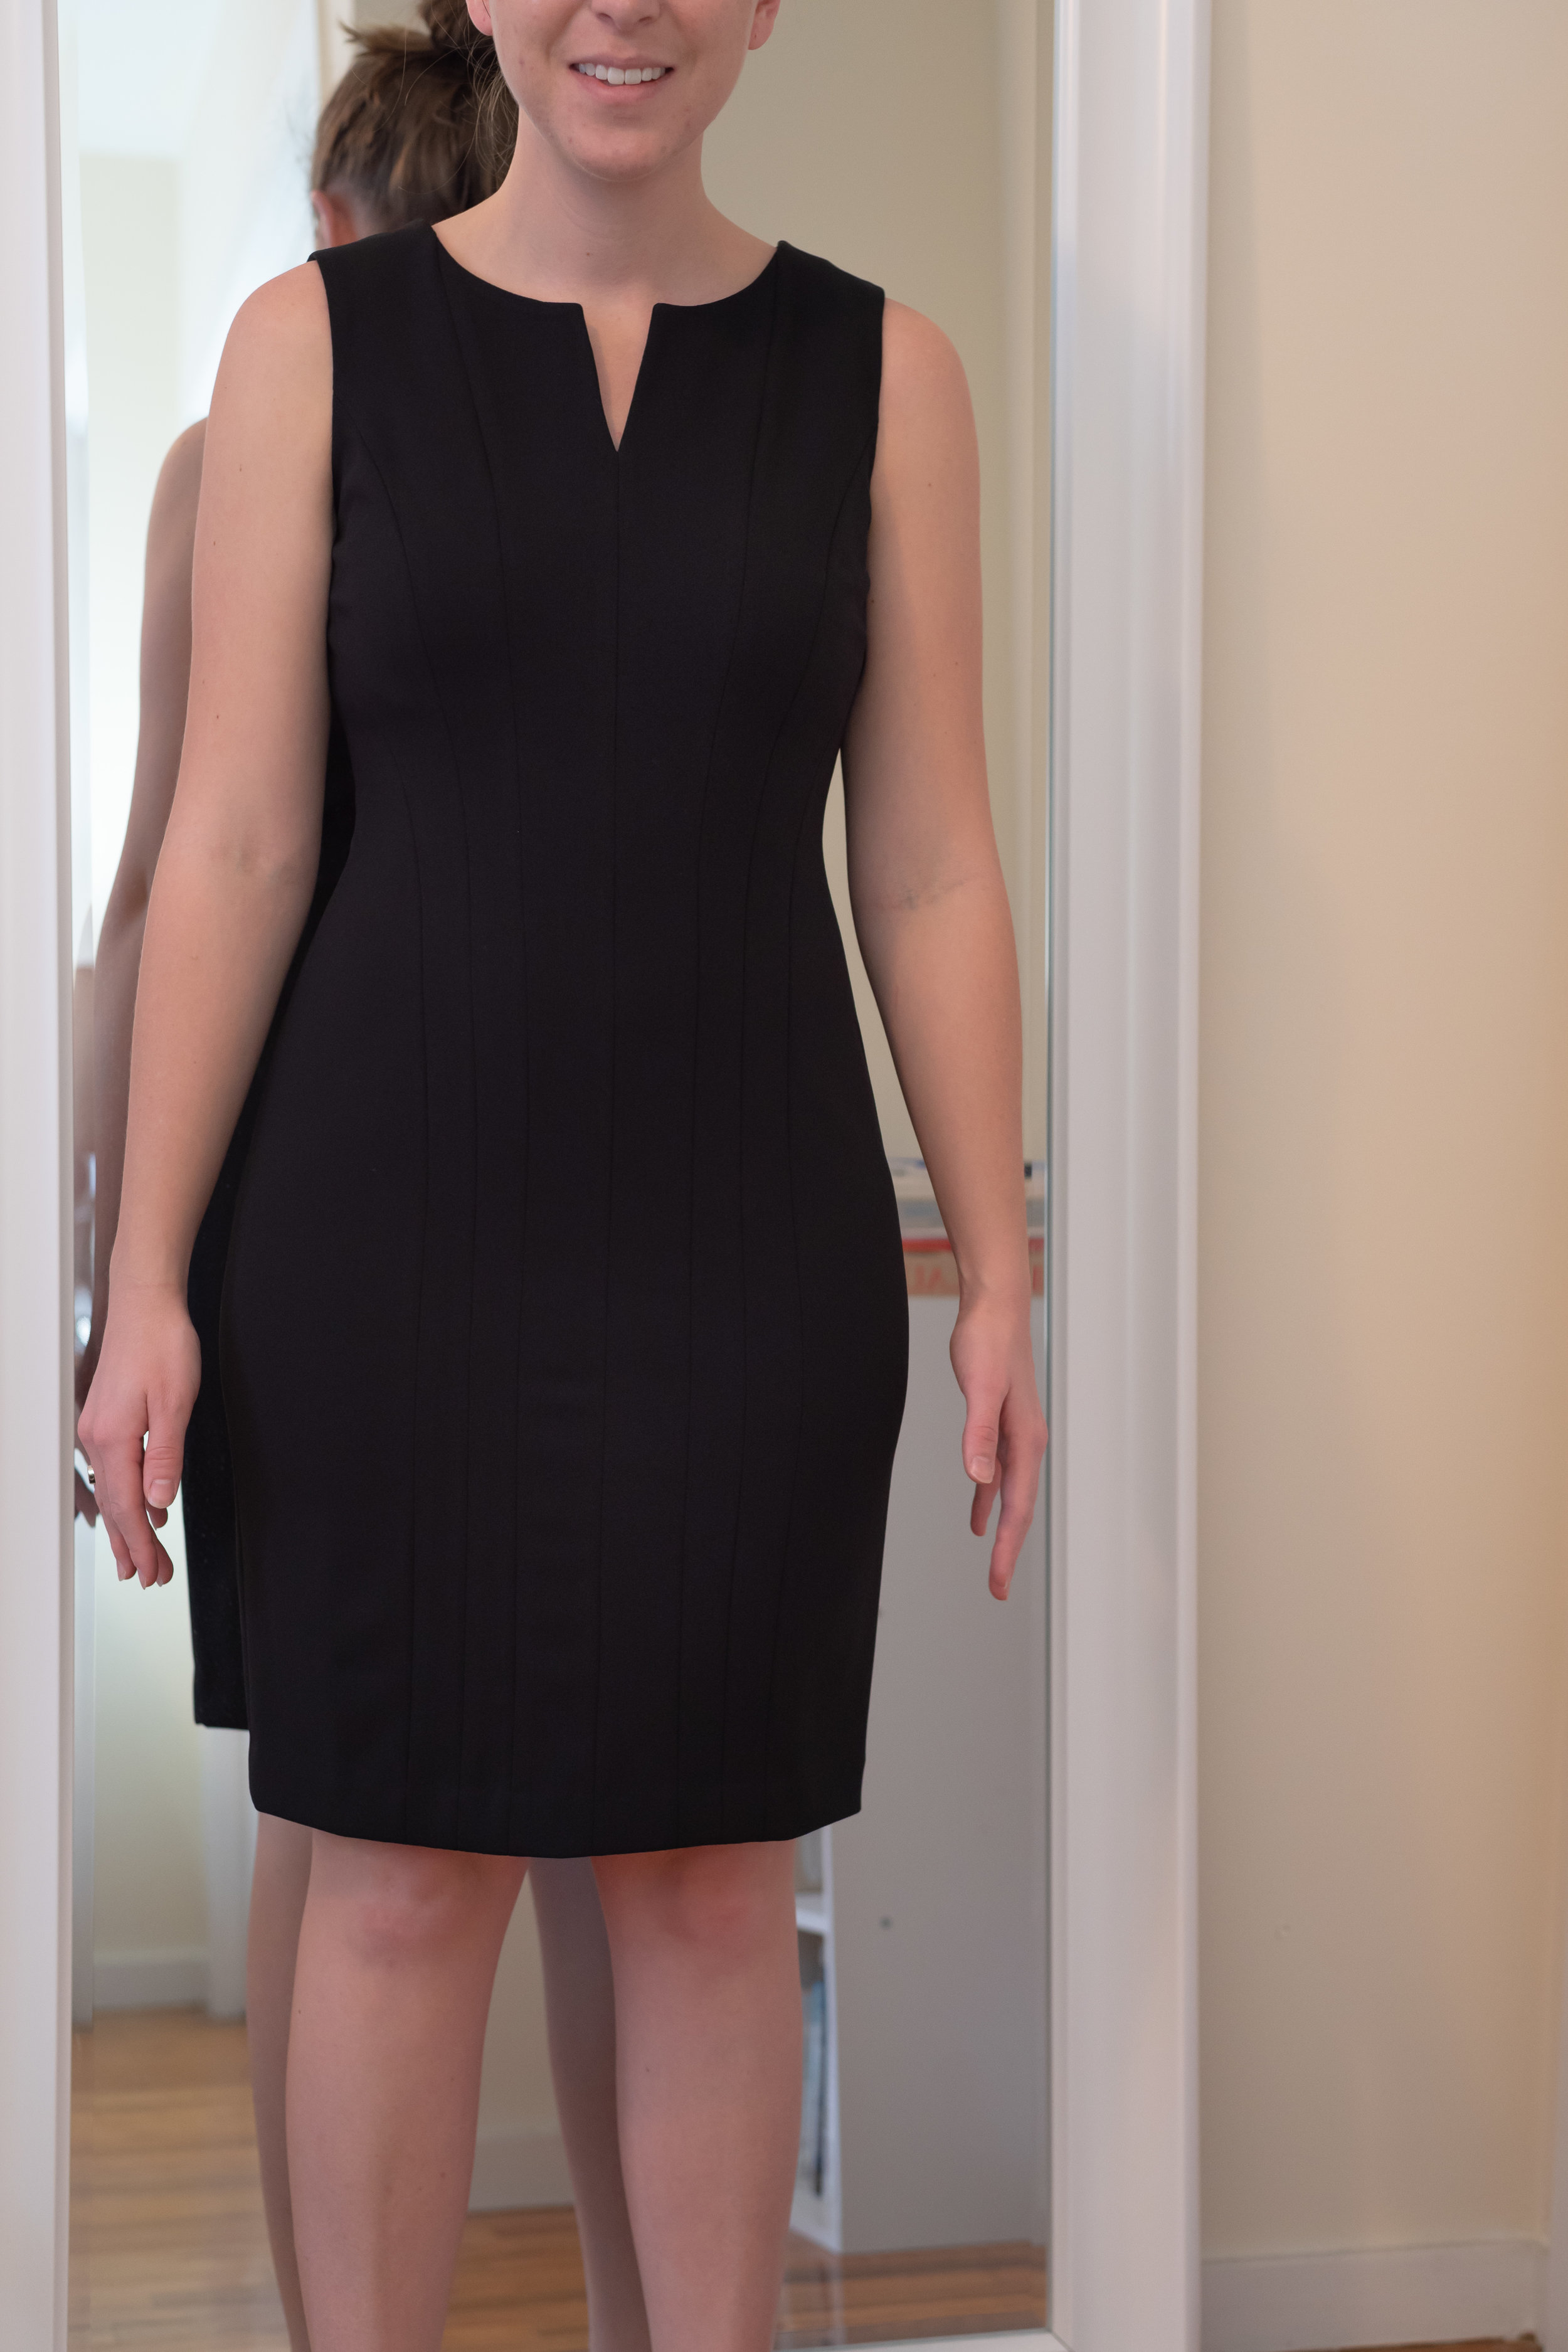 THE PEAR NECESSITIES: THE SHEATH DRESS — The Petite Pear Project